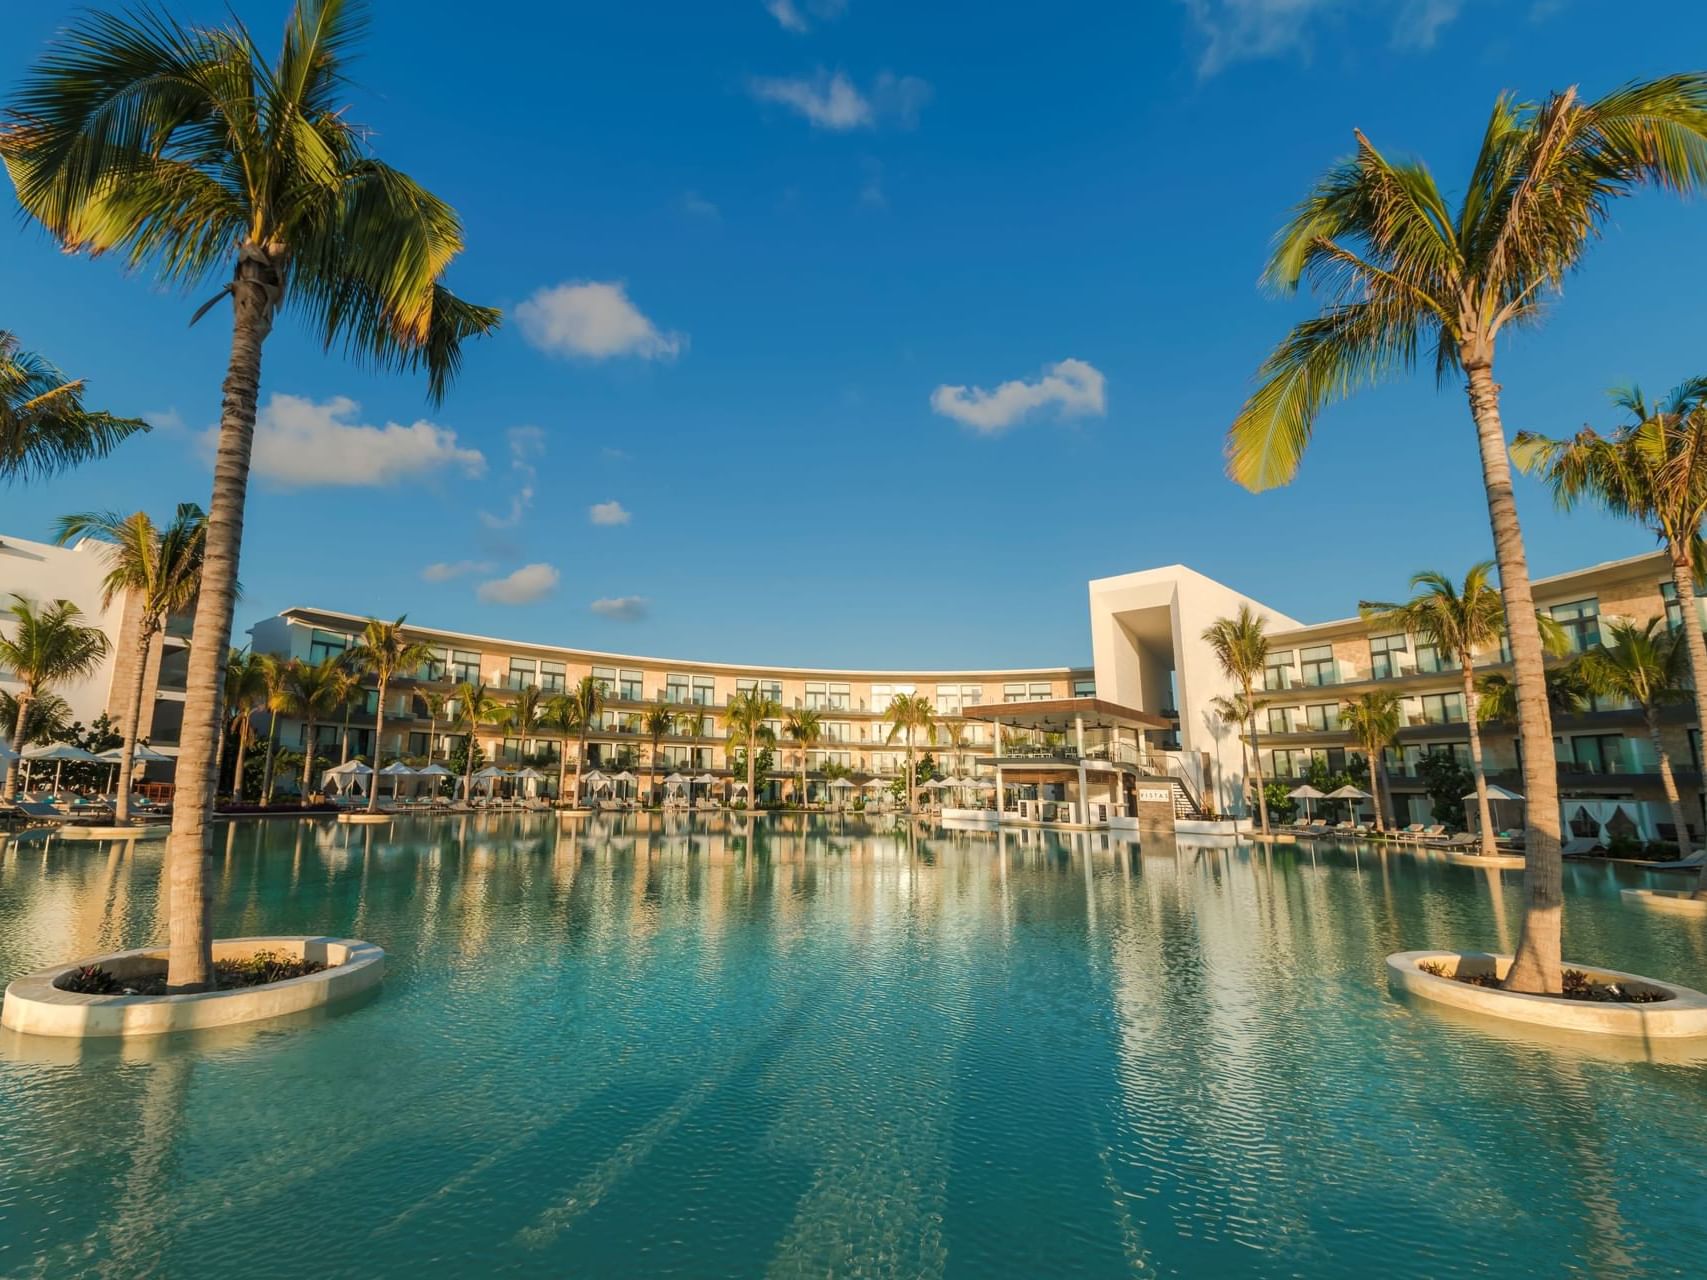 Low-angle view of the pool, palm trees & hotel Haven Riviera Cancun